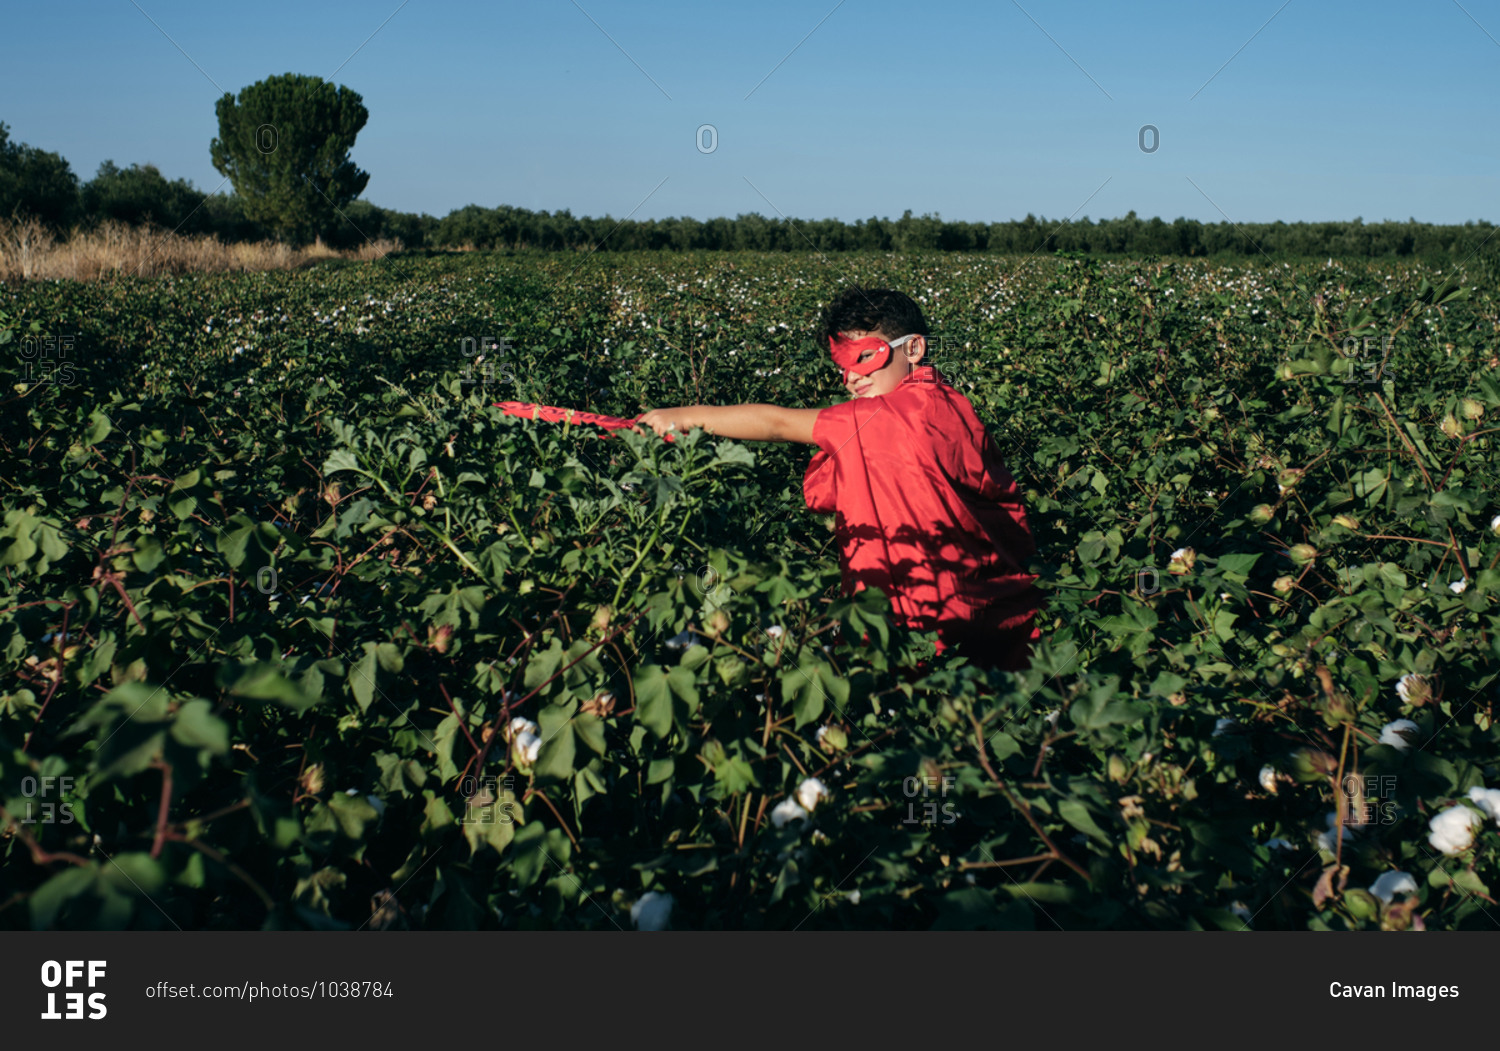 Child disguised as a red superhero enters cotton fields ready to fight